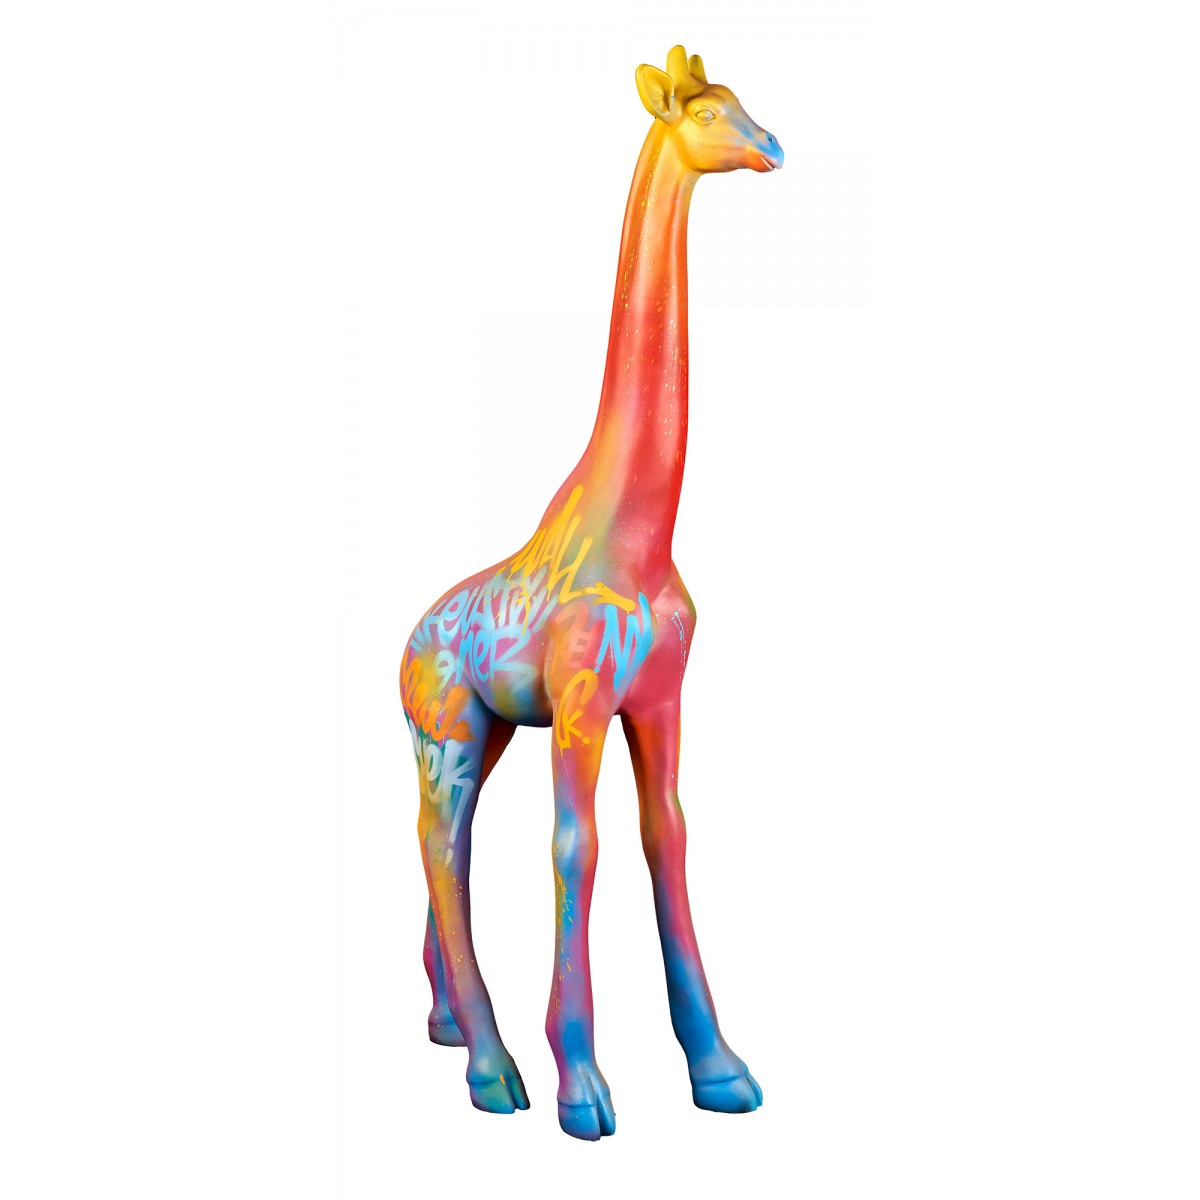 For your interior or exterior, opt for this GIRAFFE statue in quality